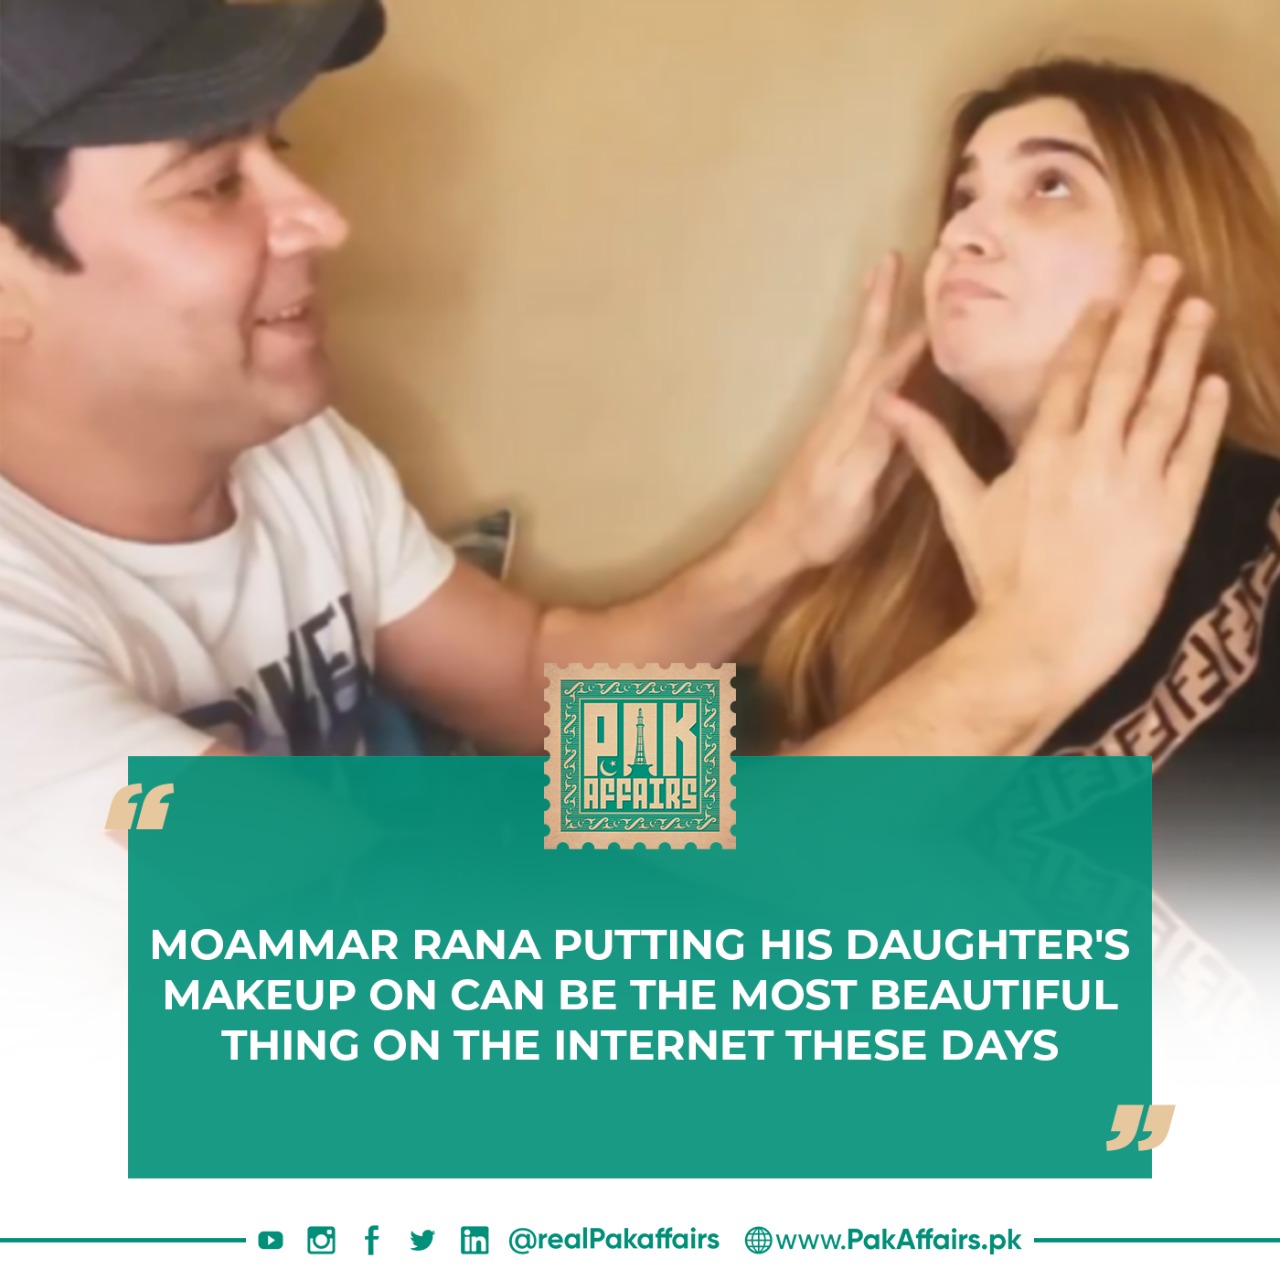 Moammar Rana Putting his daughter's makeup on can be the most beautiful thing on the internet these days.